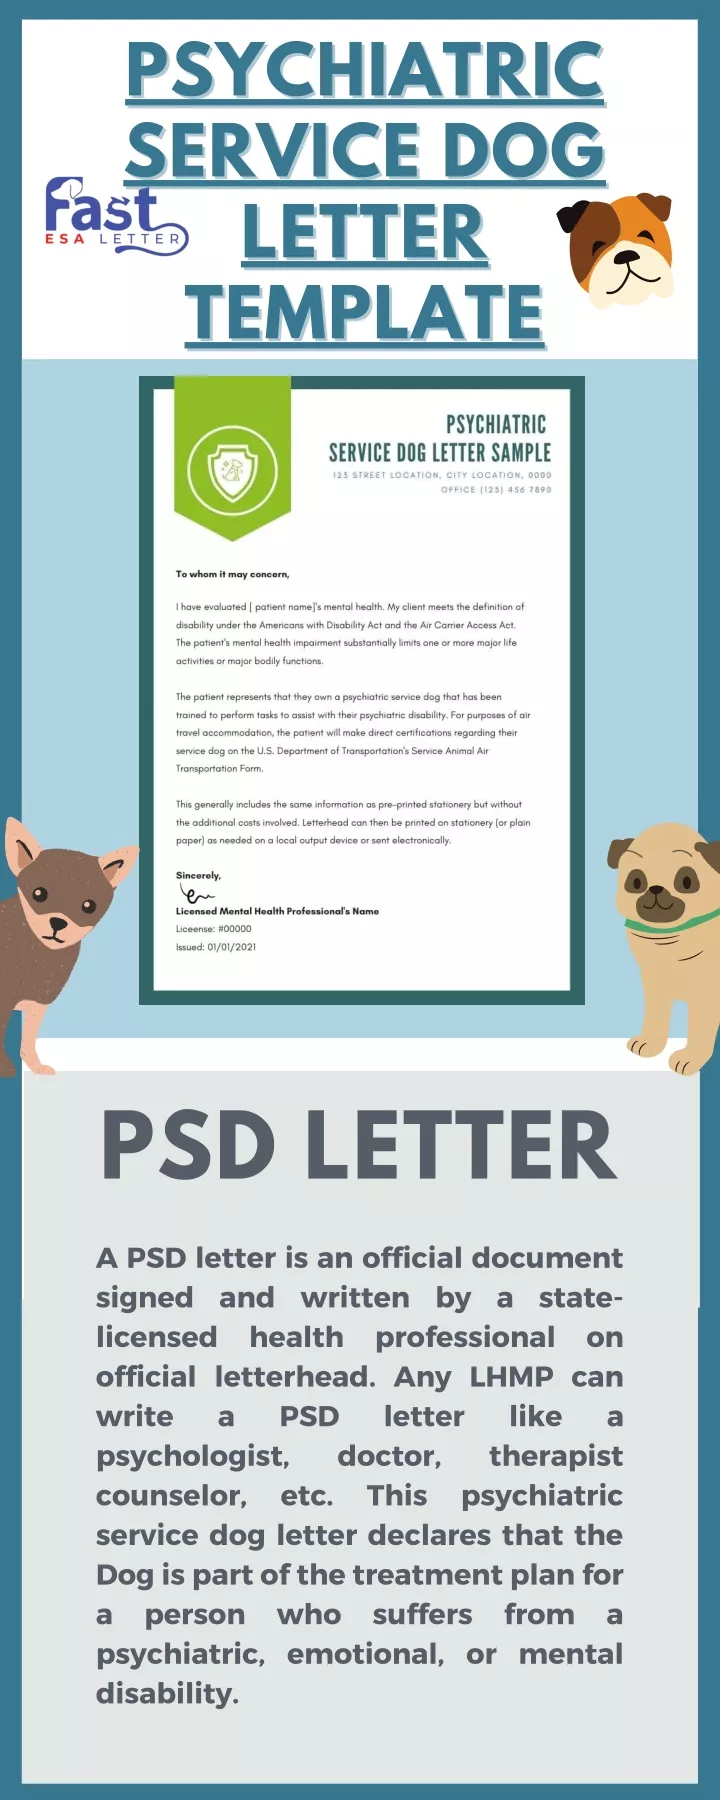 PPT Psychiatric Service Dog Letter Template PowerPoint Presentation